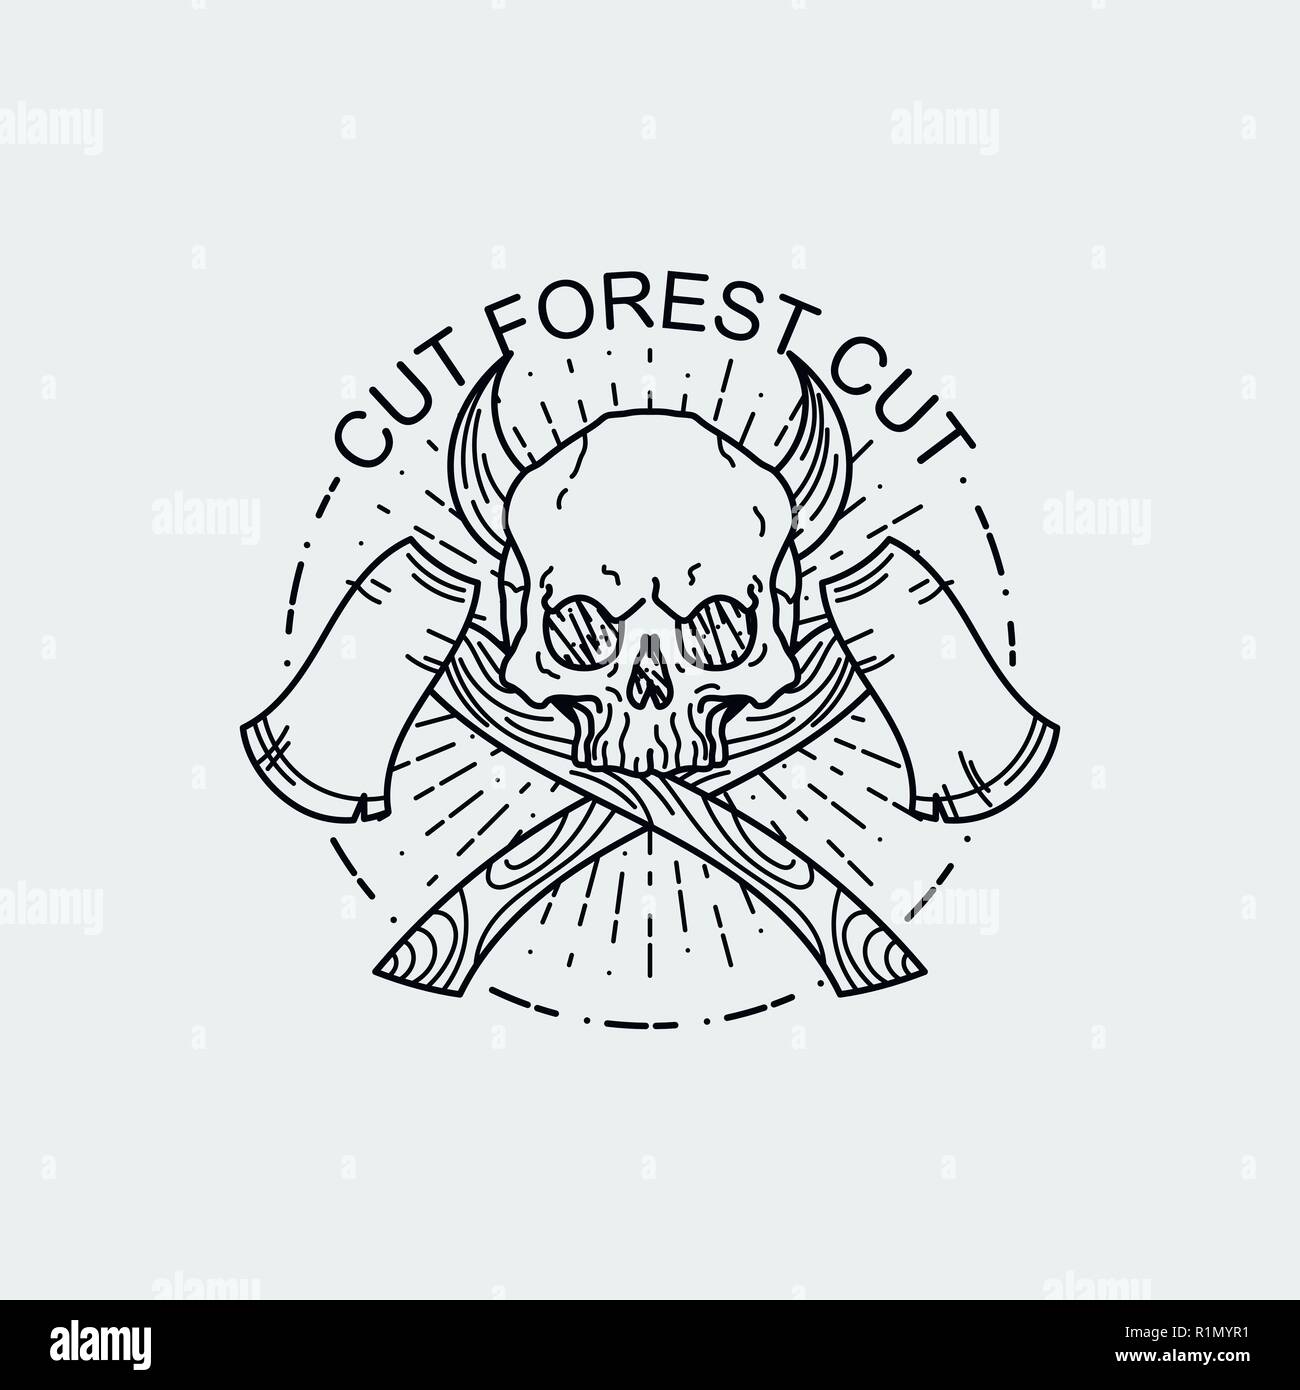 Cut forest cut. Vector illustration of black and white tattoo graphic human skull with axes and horns. Lined symbol Stock Vector